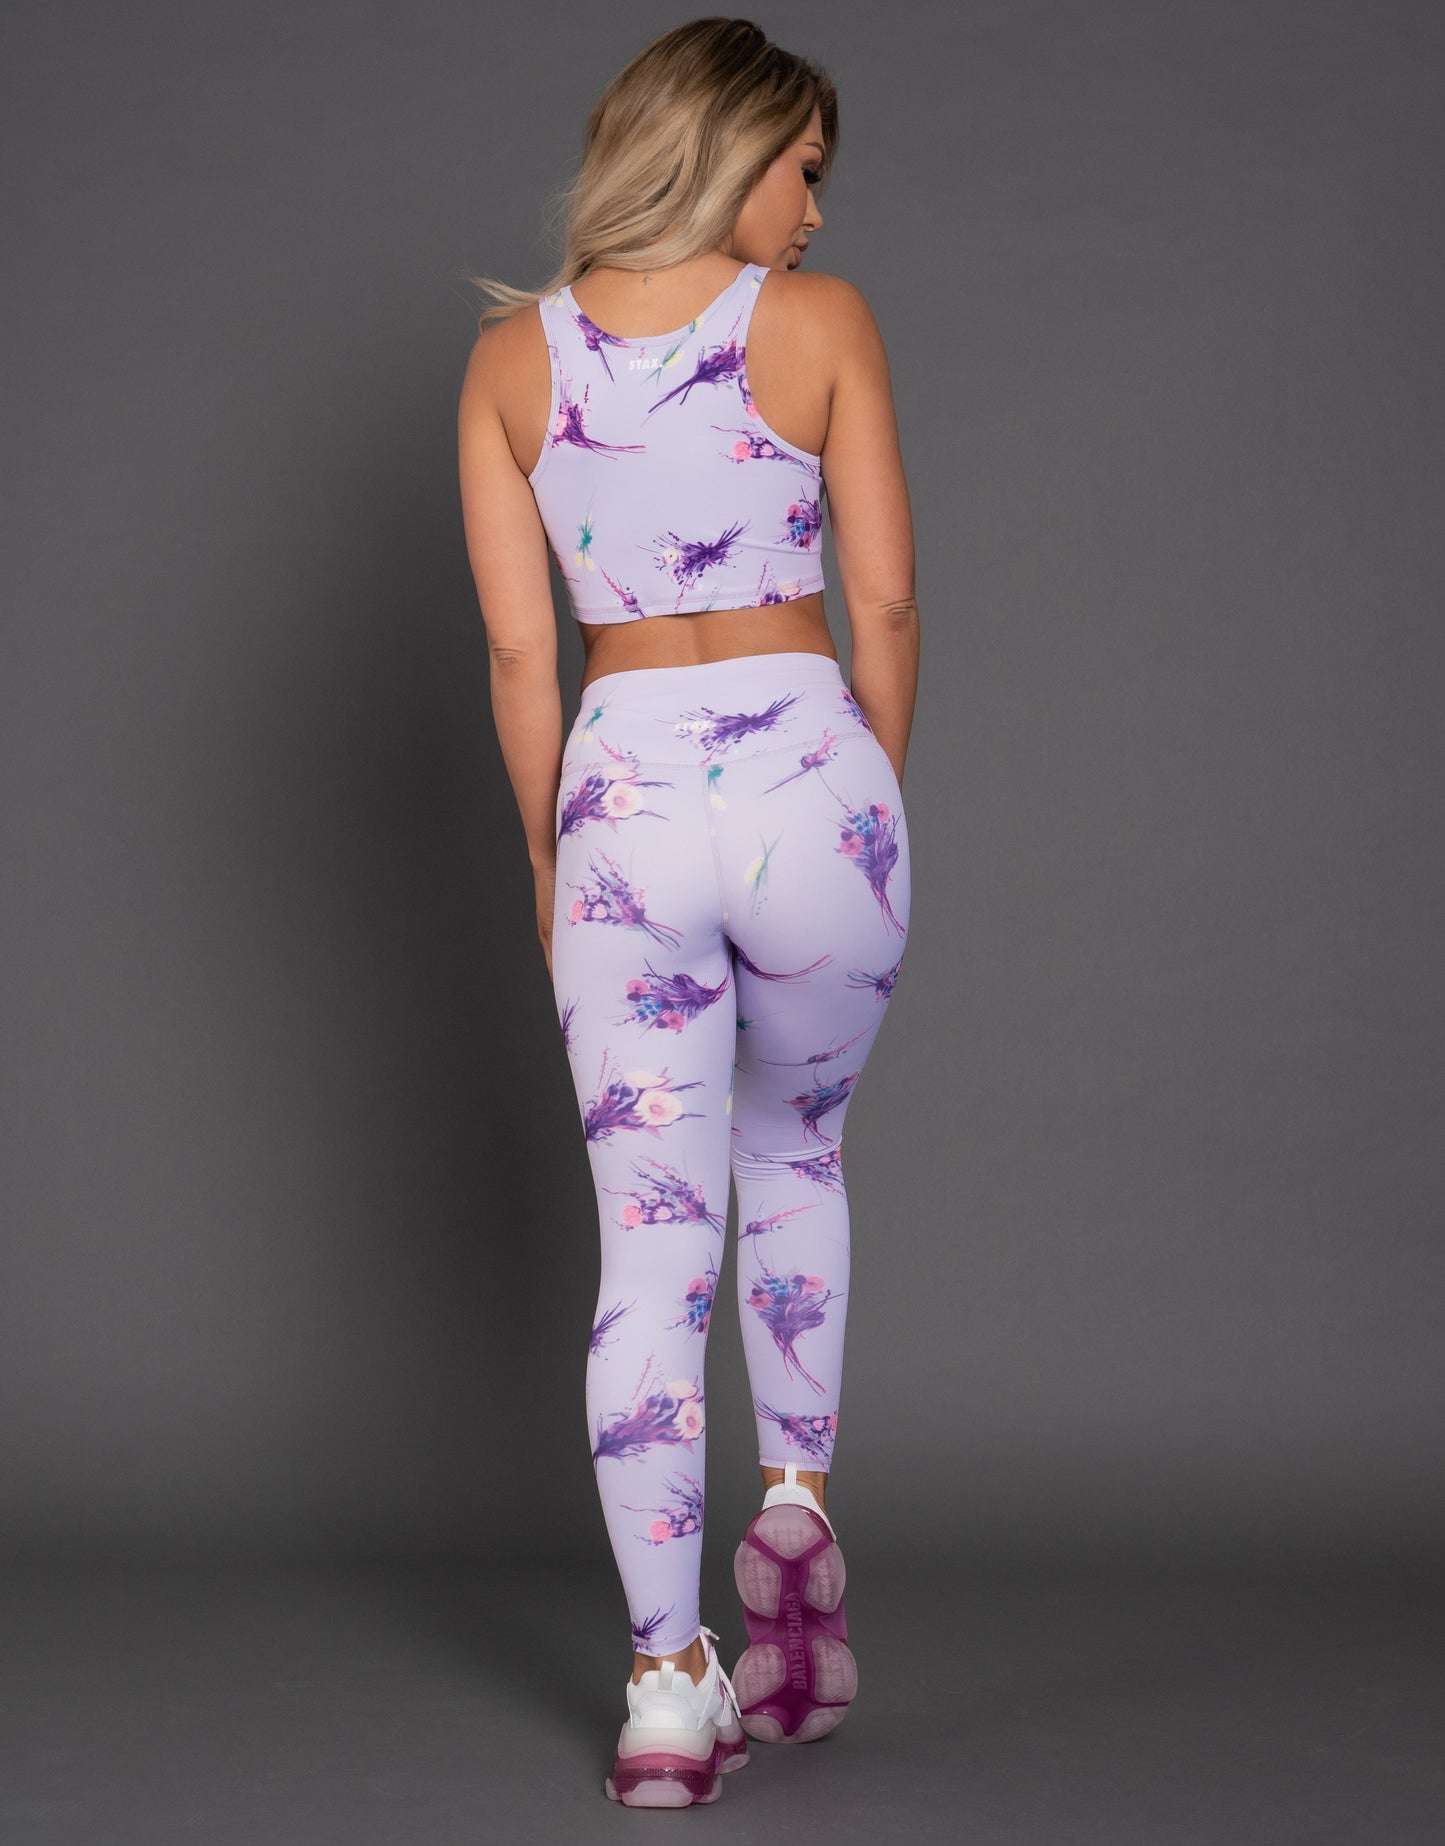 Spring Collection Tights - Lavender